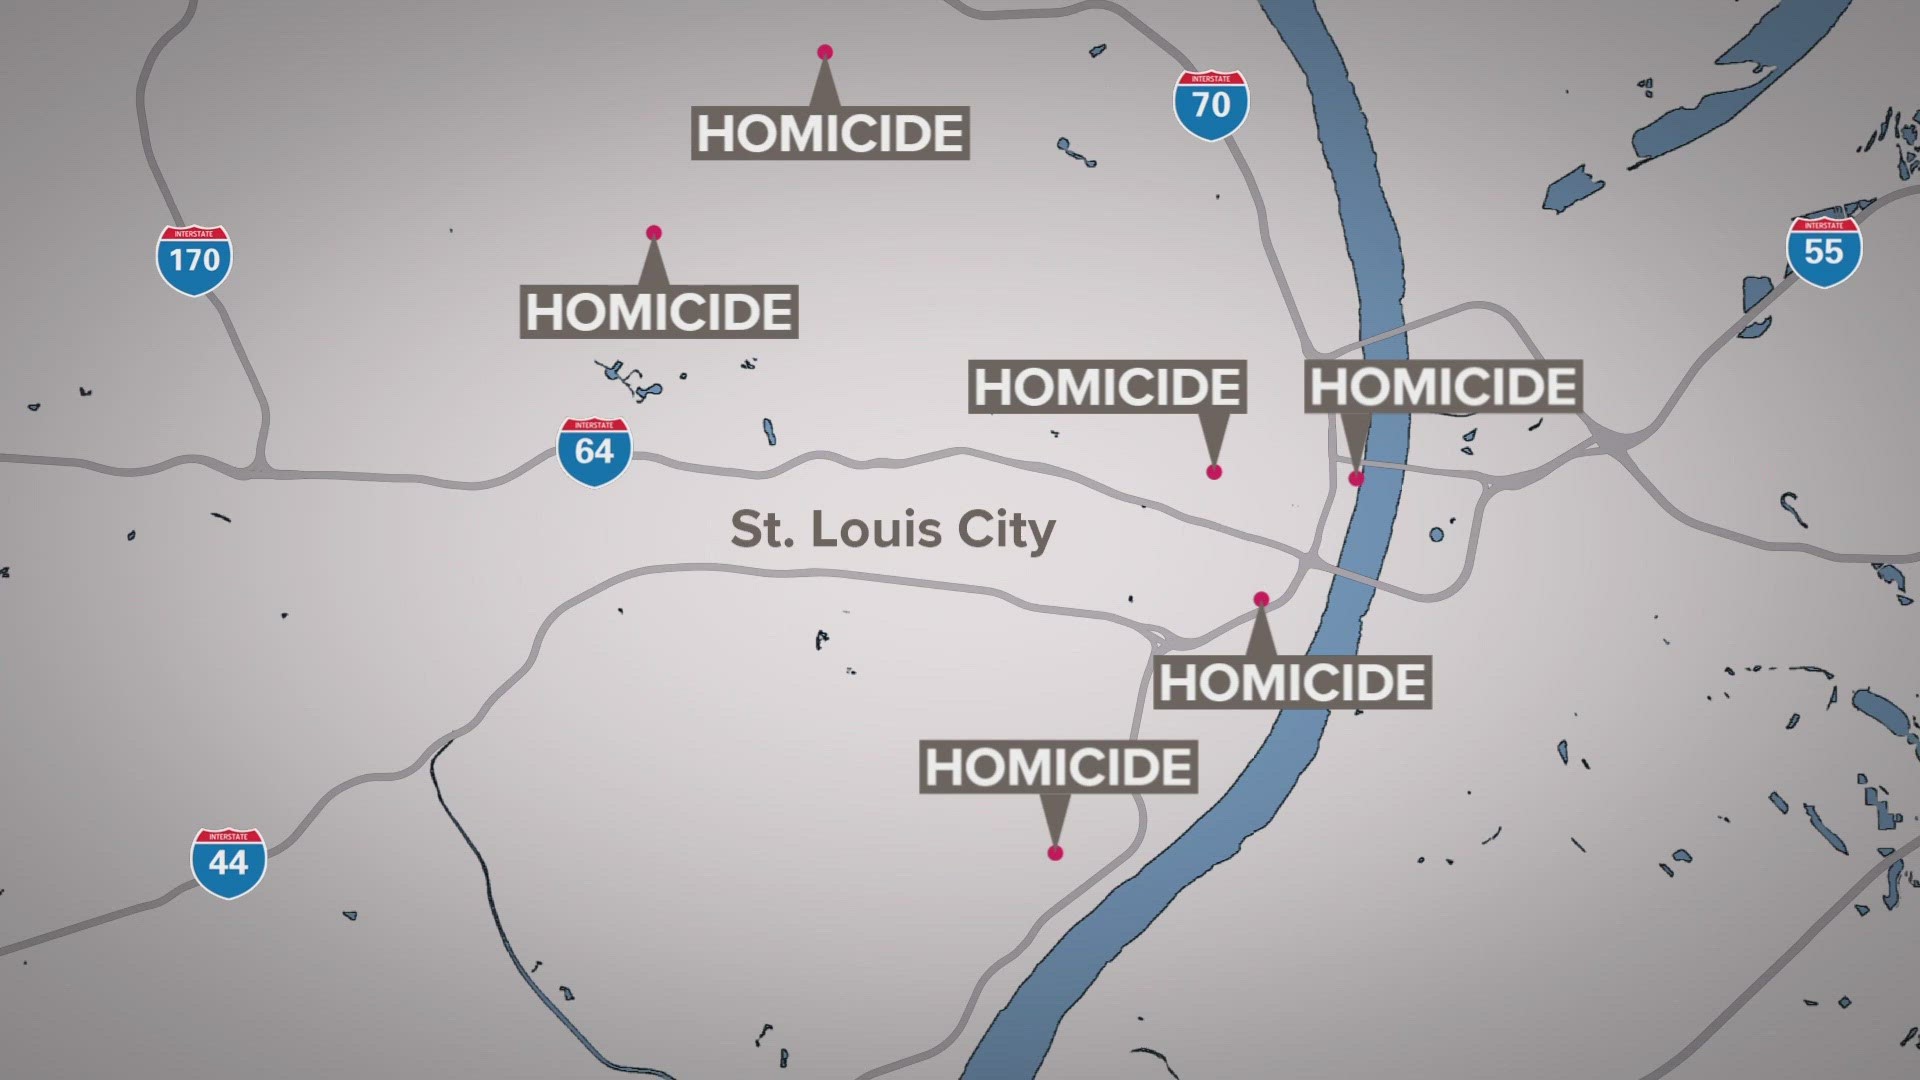 Six people were killed this weekend in St. Louis. It marked the deadliest weekend of the year so far in the city.